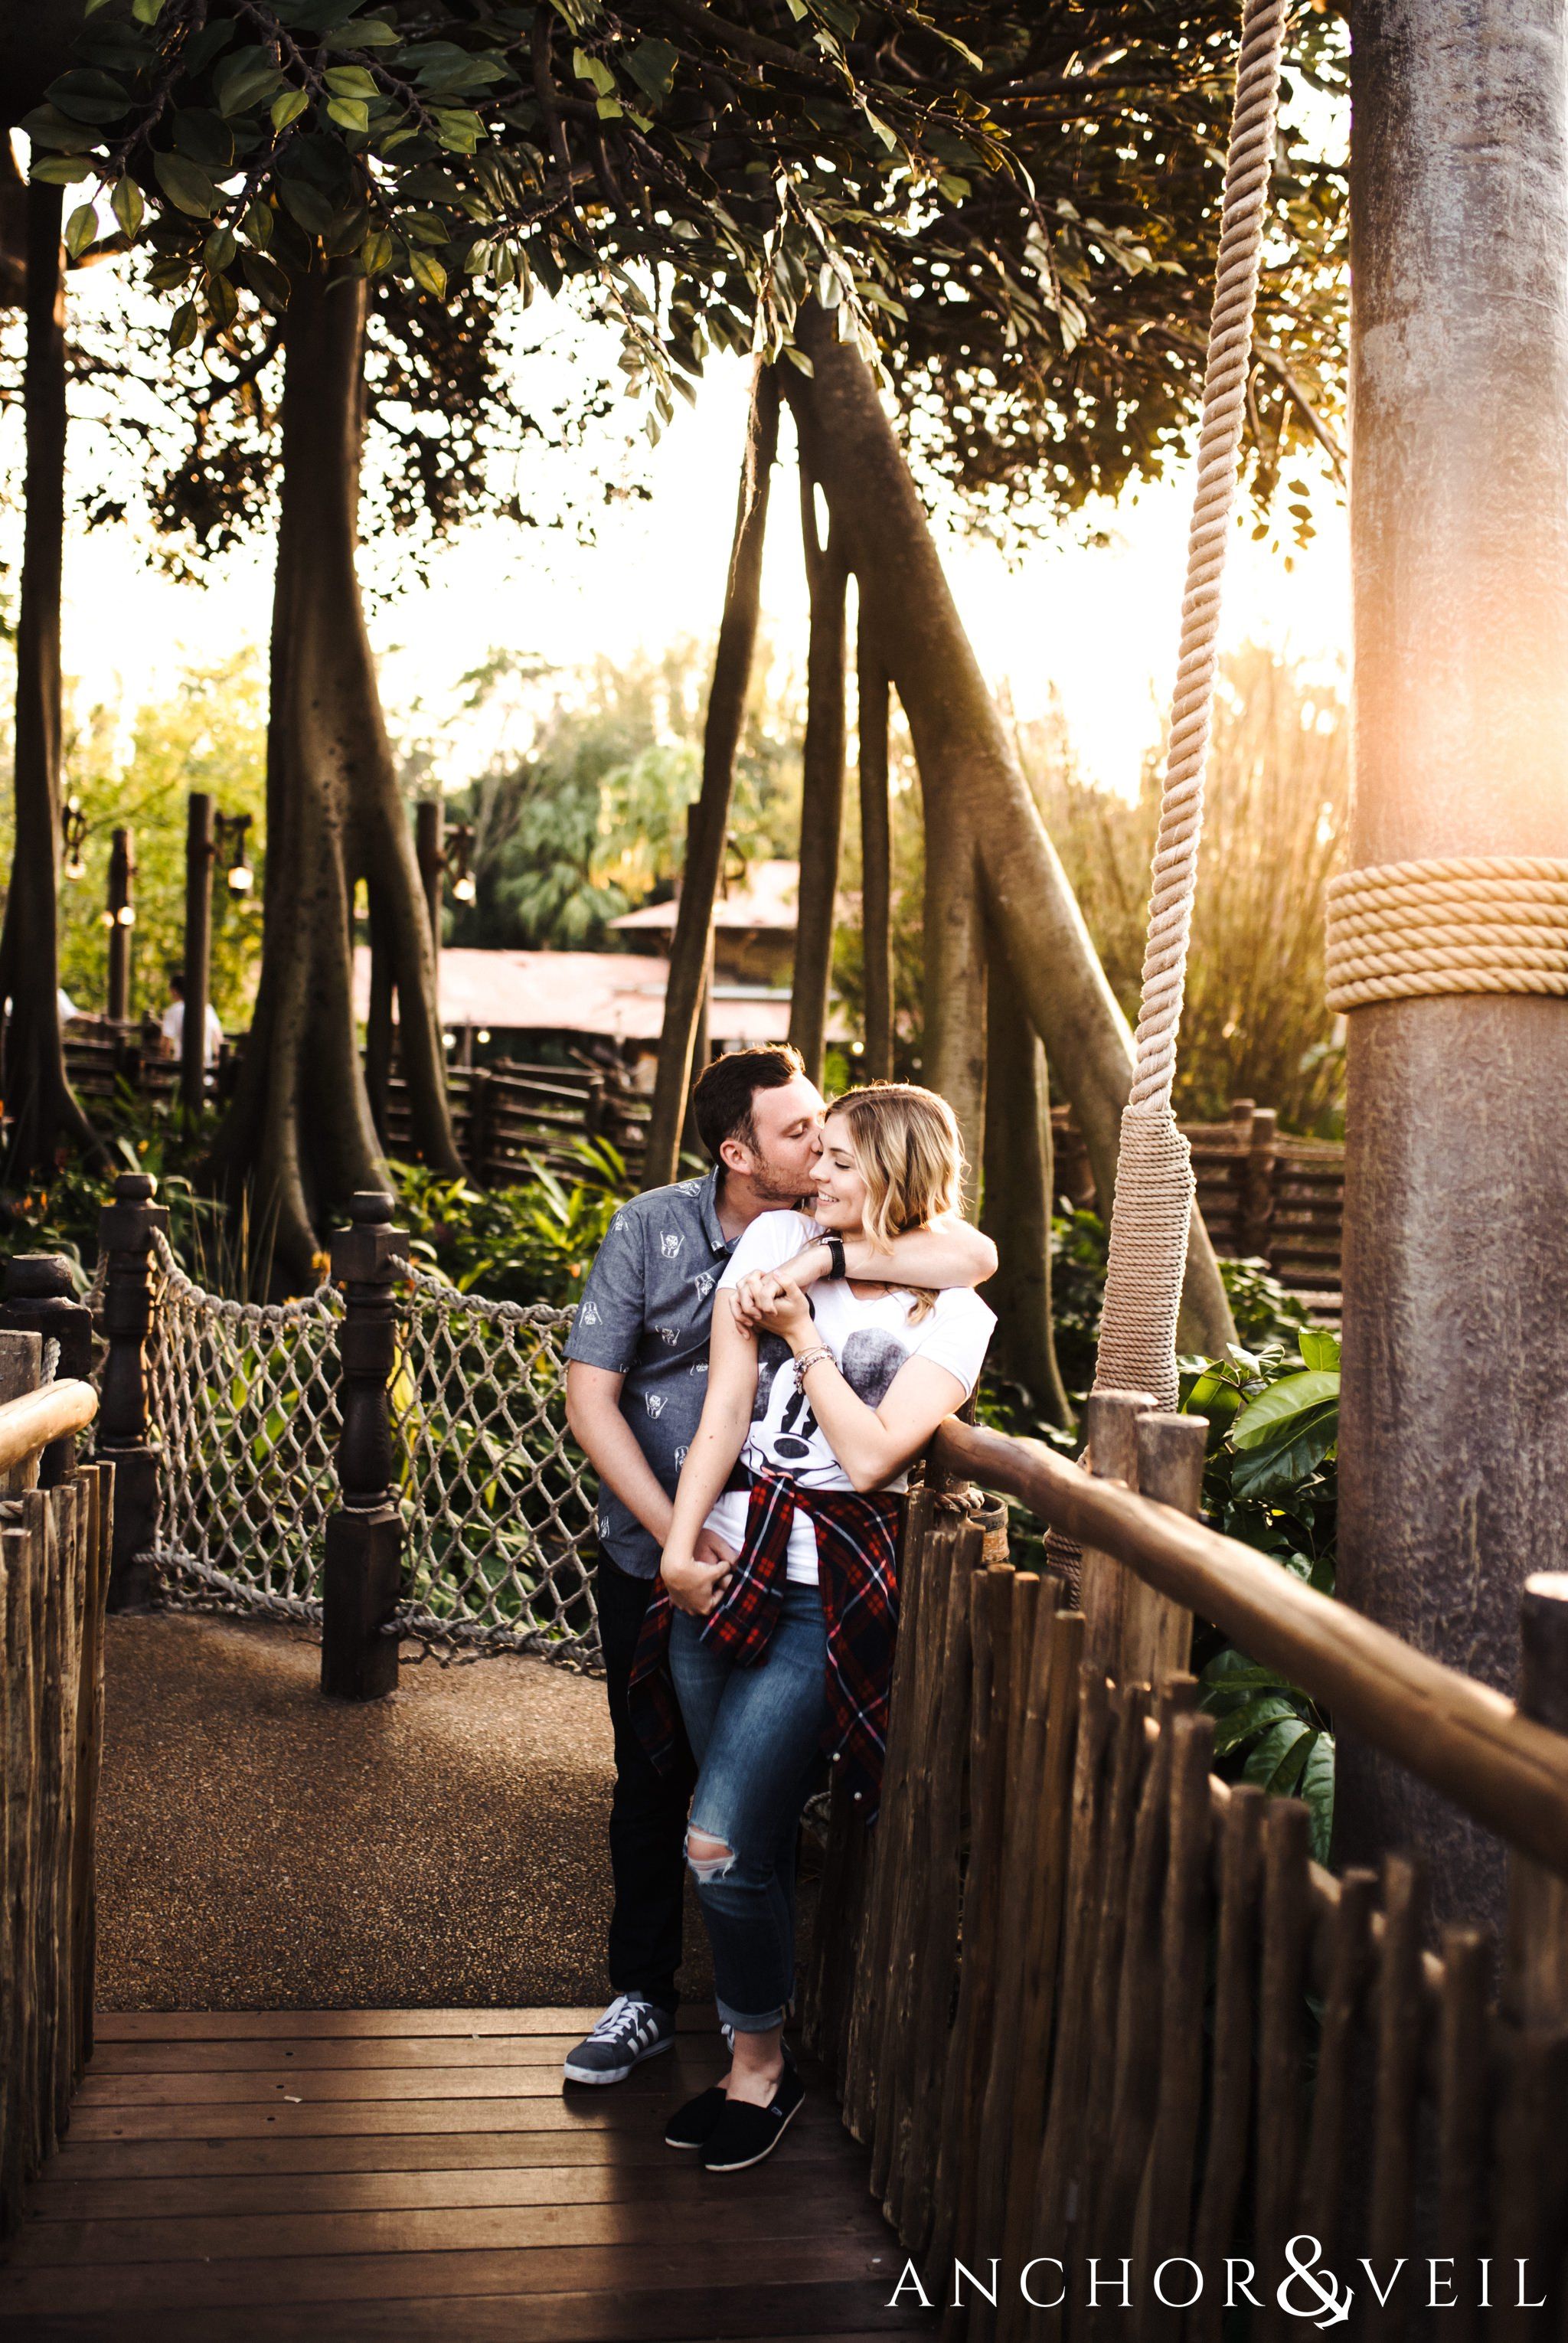 in front of Robinson Crusoe tree house during their Disney world engagement session at Disney's Magic Kingdom